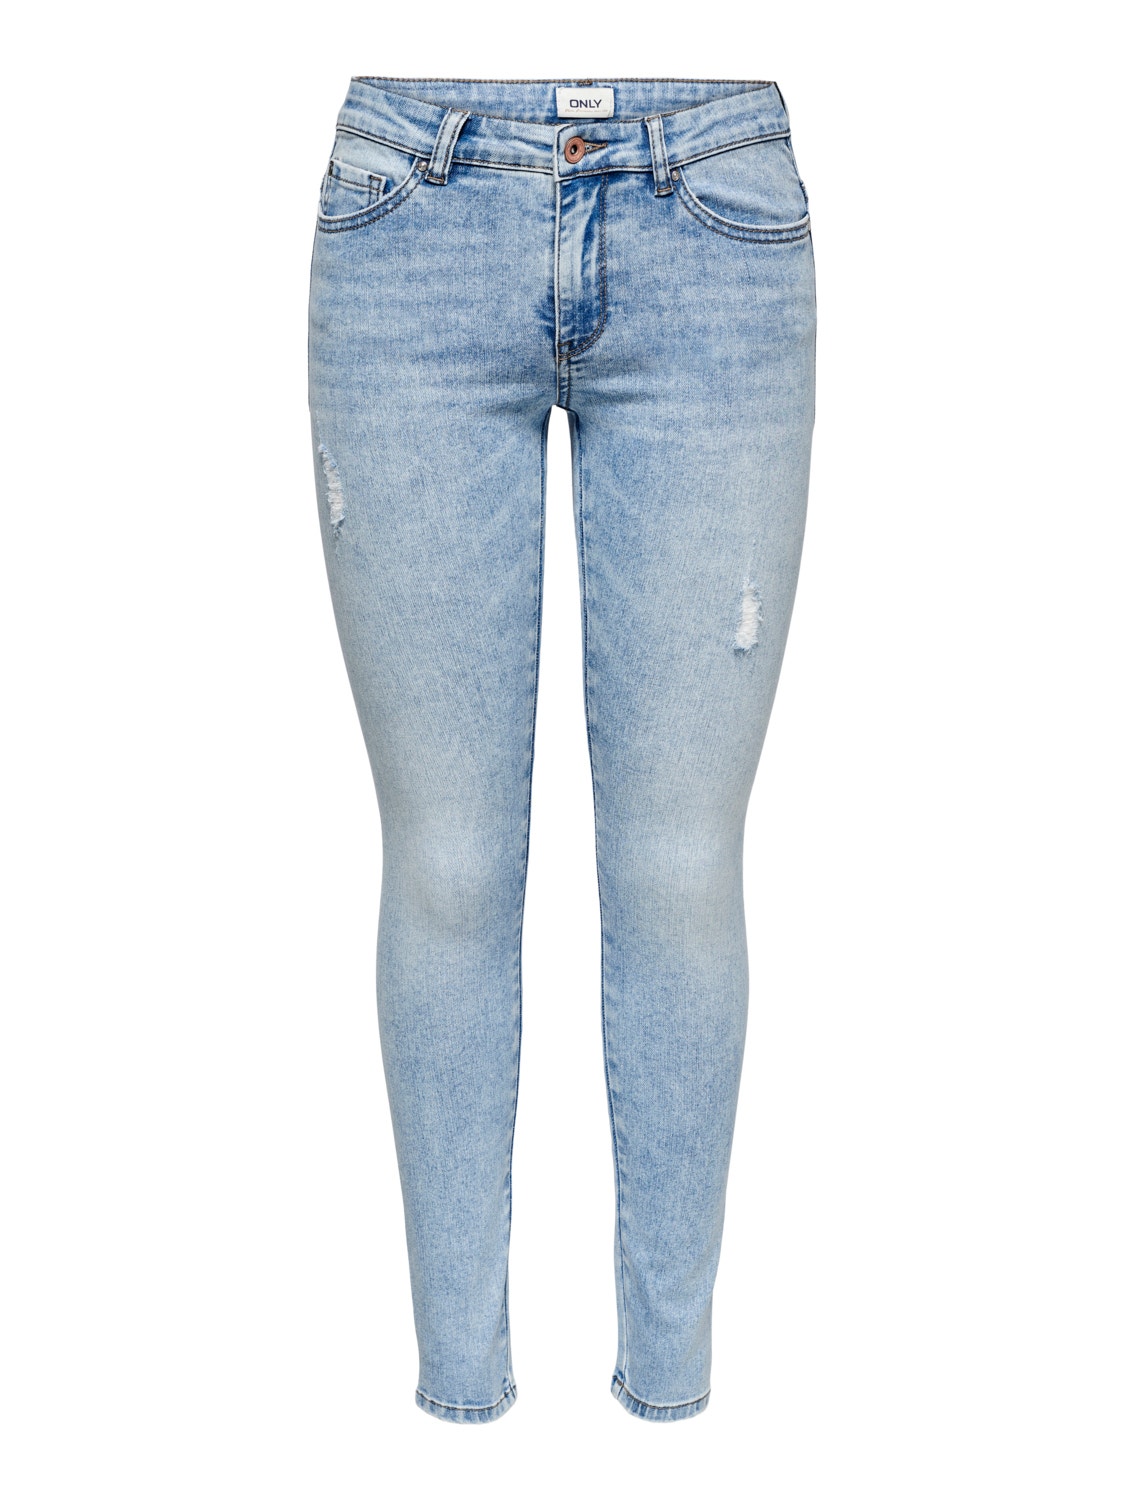 ONLY Skinny Fit Mittlere Taille Jeans -Light Blue Denim - 15259191